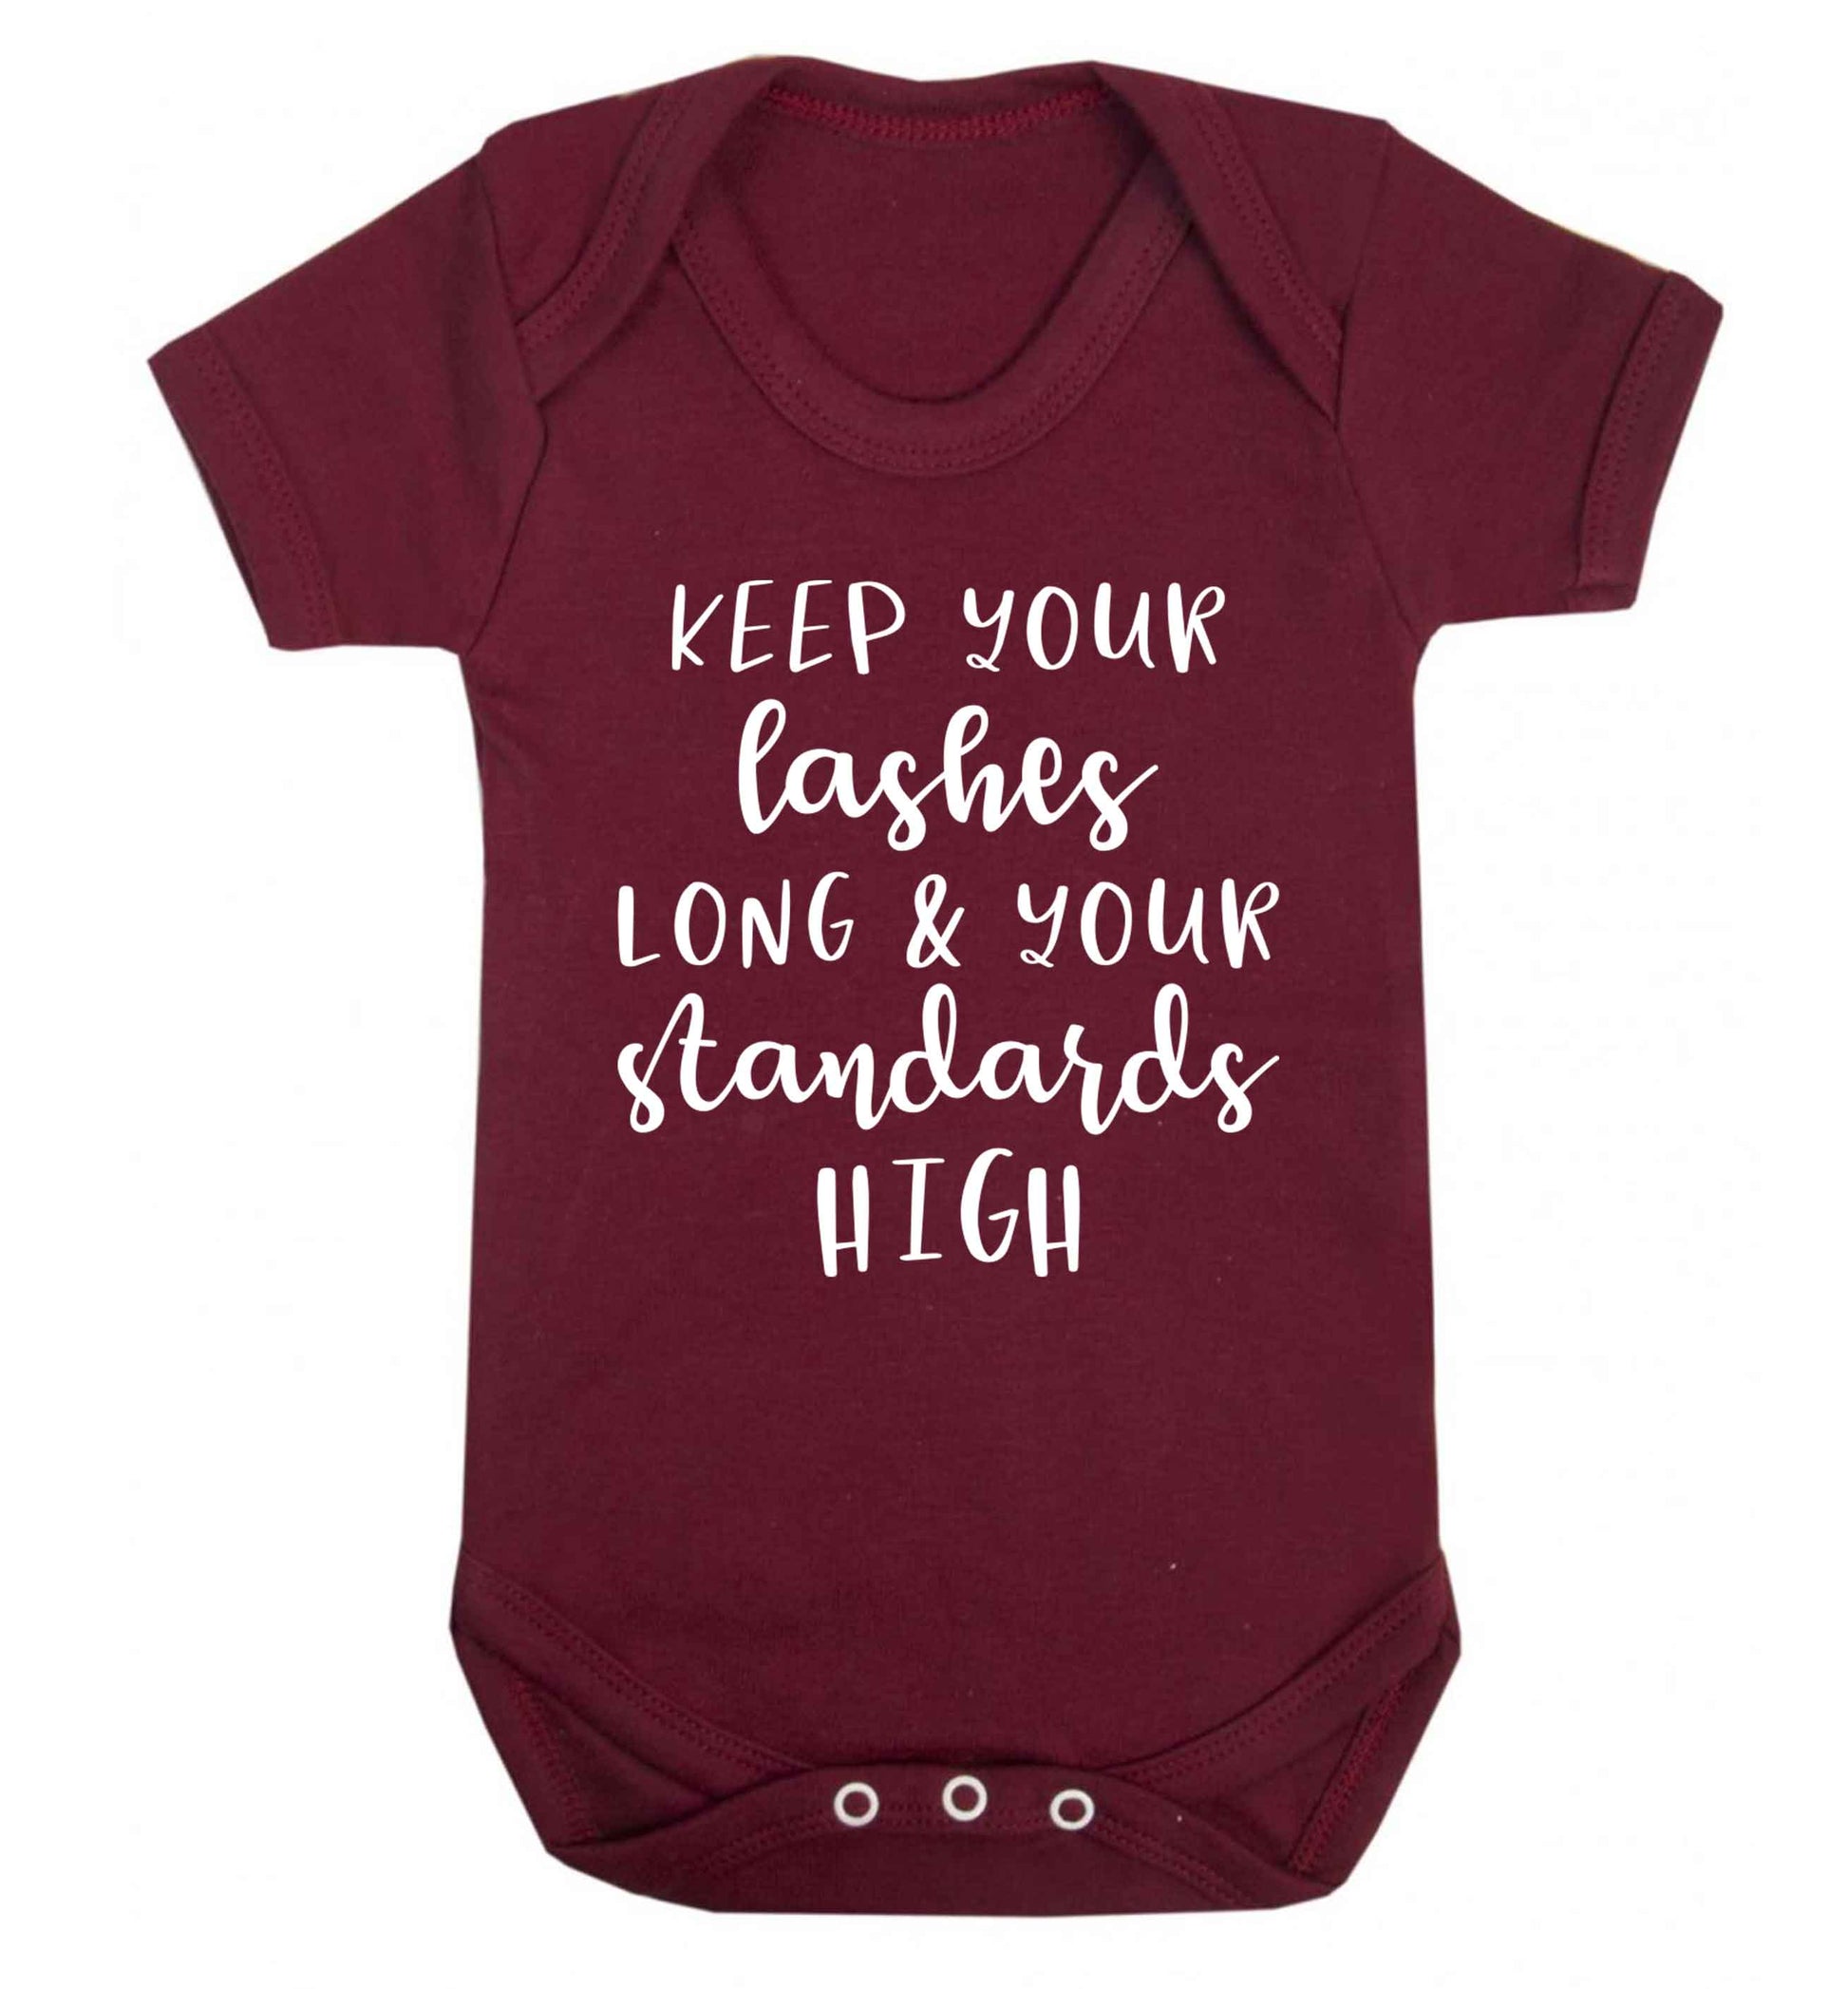 Keep your lashes long and your standards high Baby Vest maroon 18-24 months